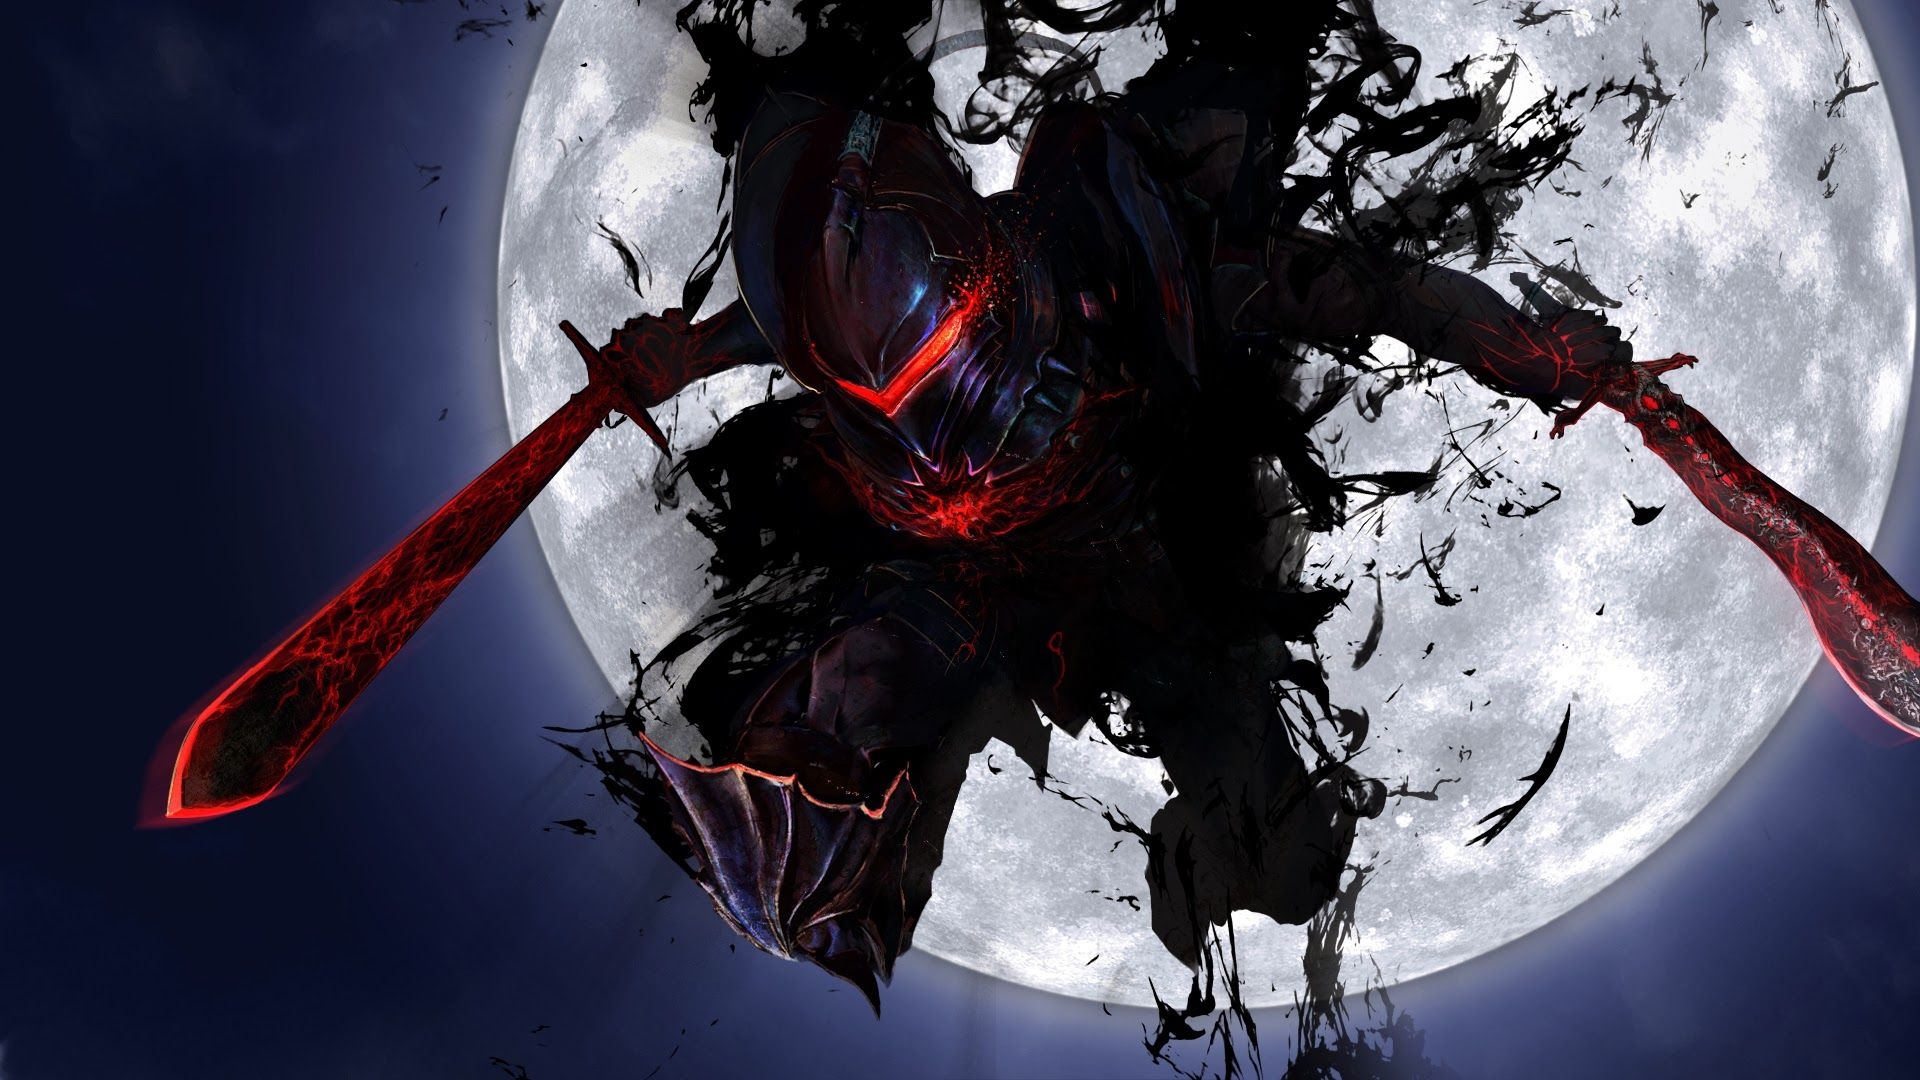 hd, red, sword, anime boy, dark, yasuo, cool, leauge of legends, moon, weapon, shadows